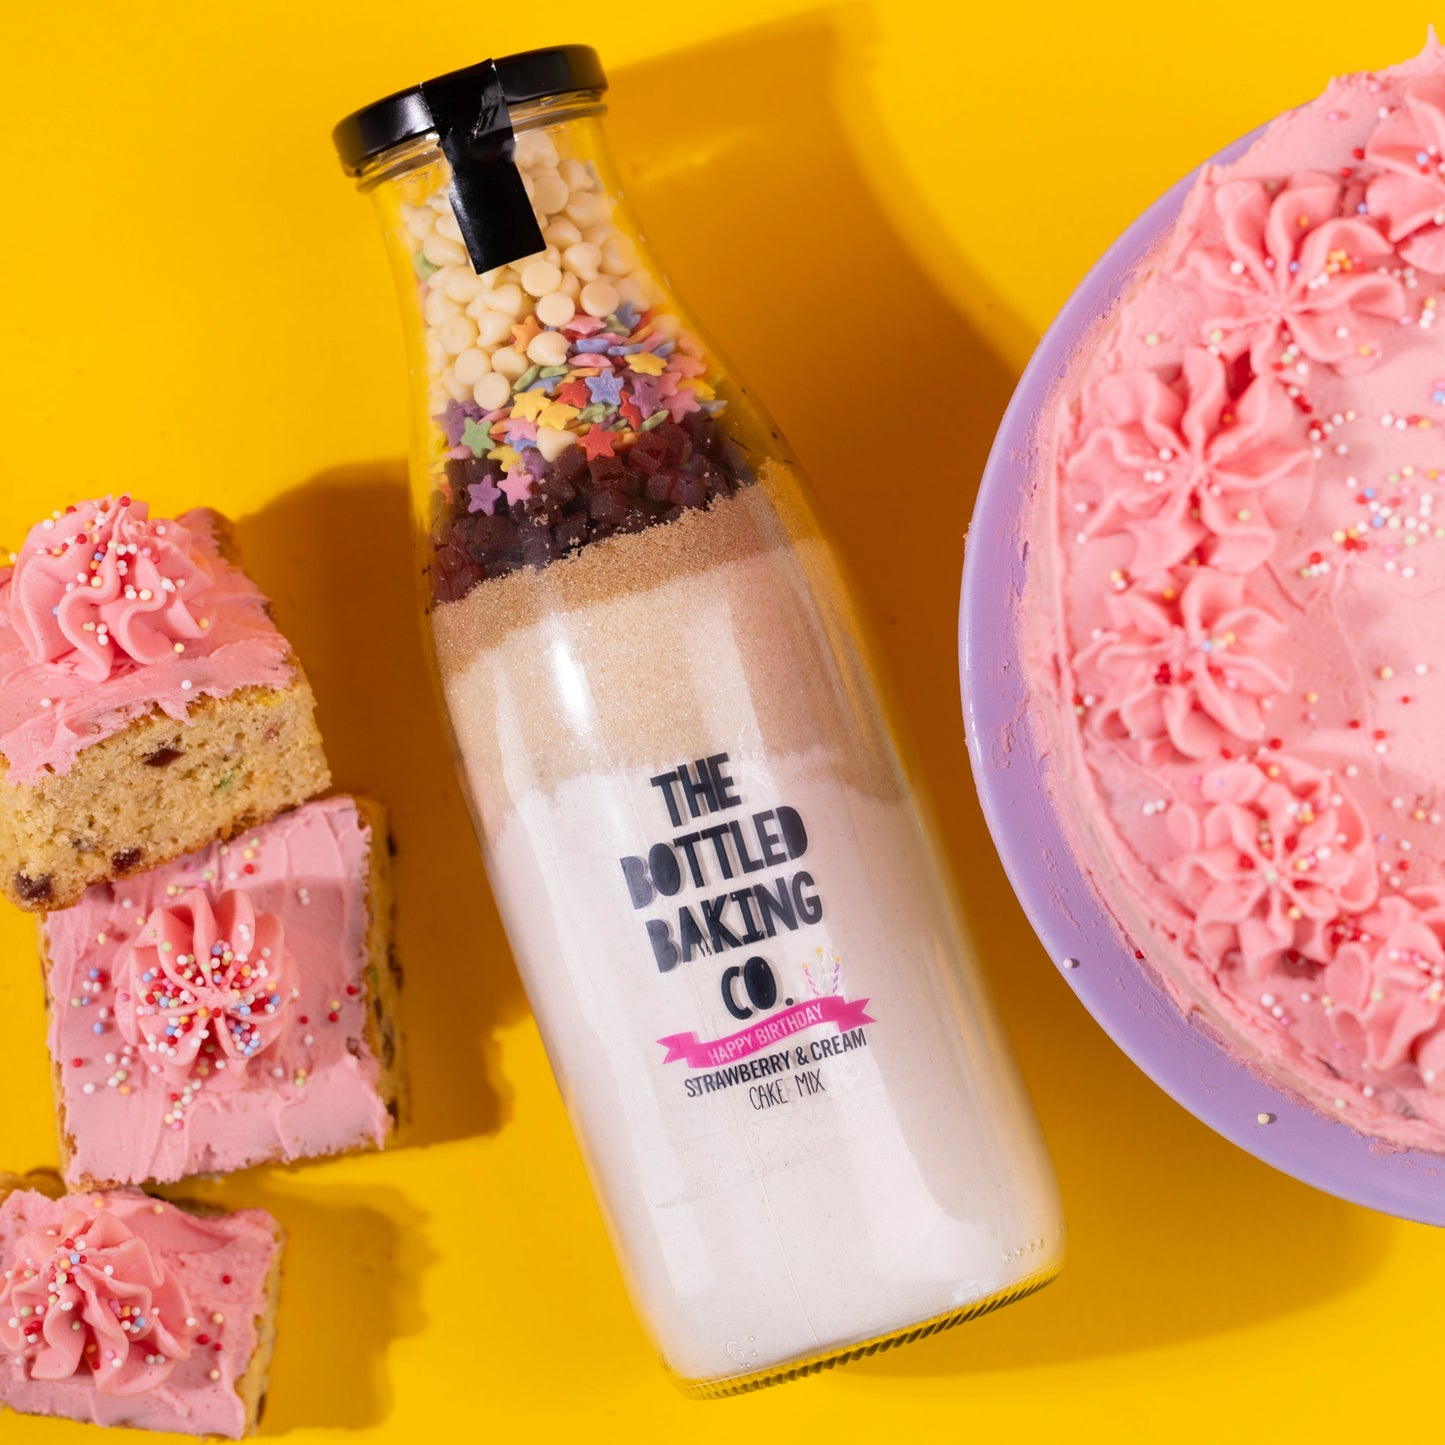 Birthday Cake Mix in a Bottle